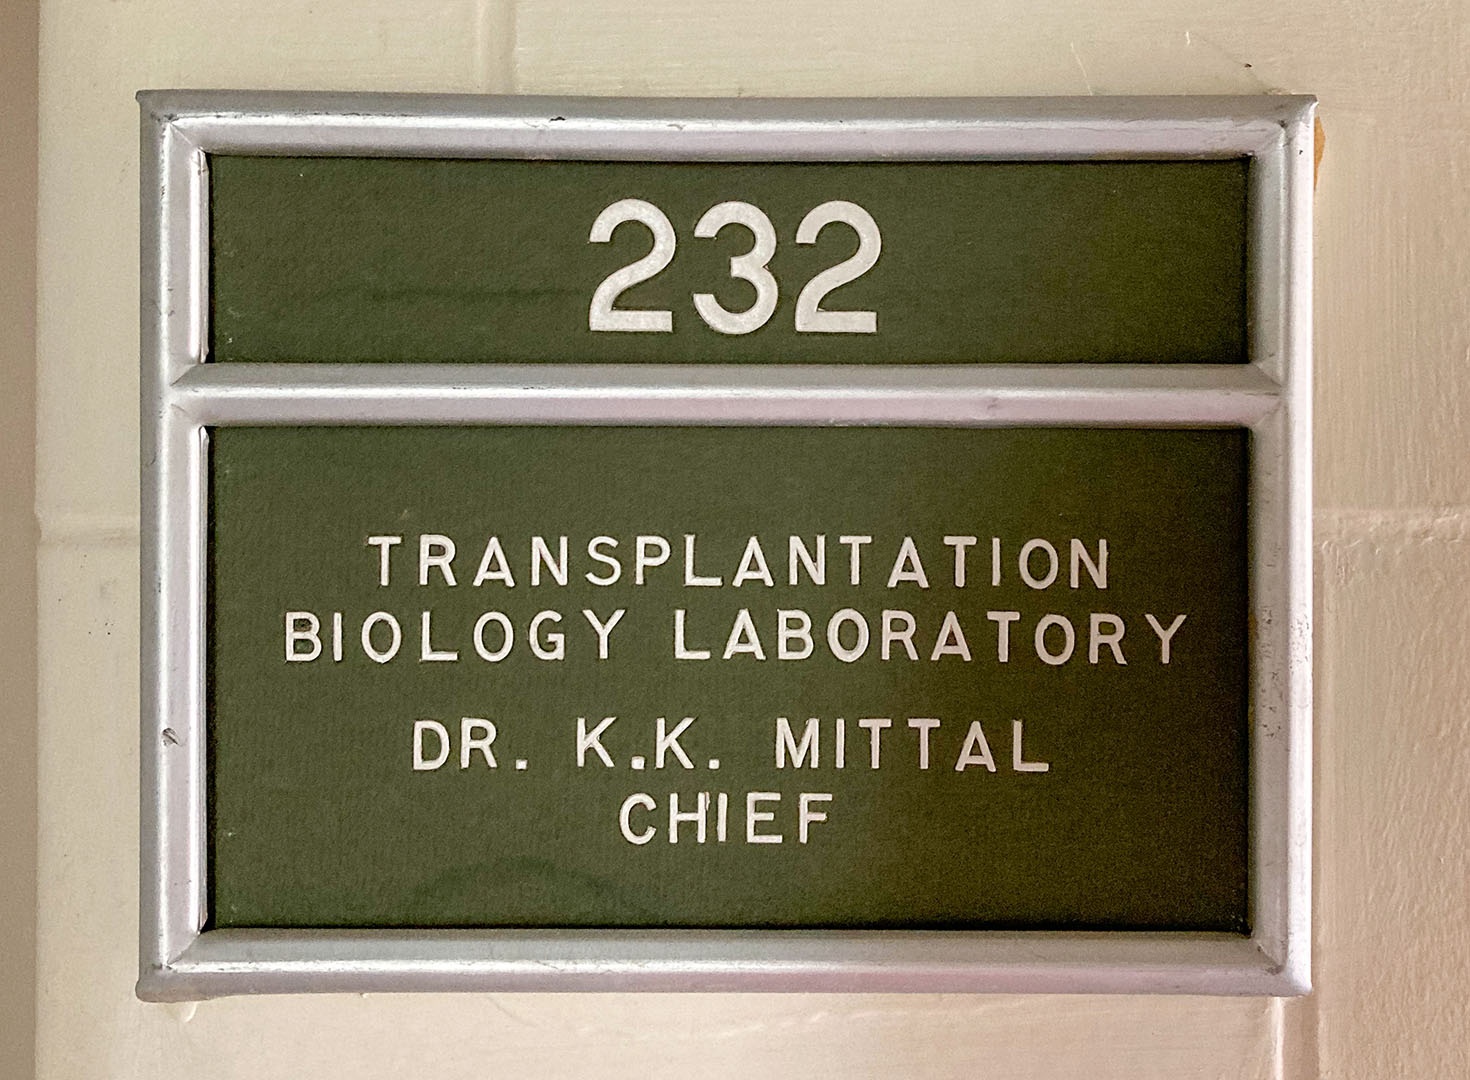 A green and white sign with room number 232 and transplantation biology laboratory on it, in an aluminum rectangular holder